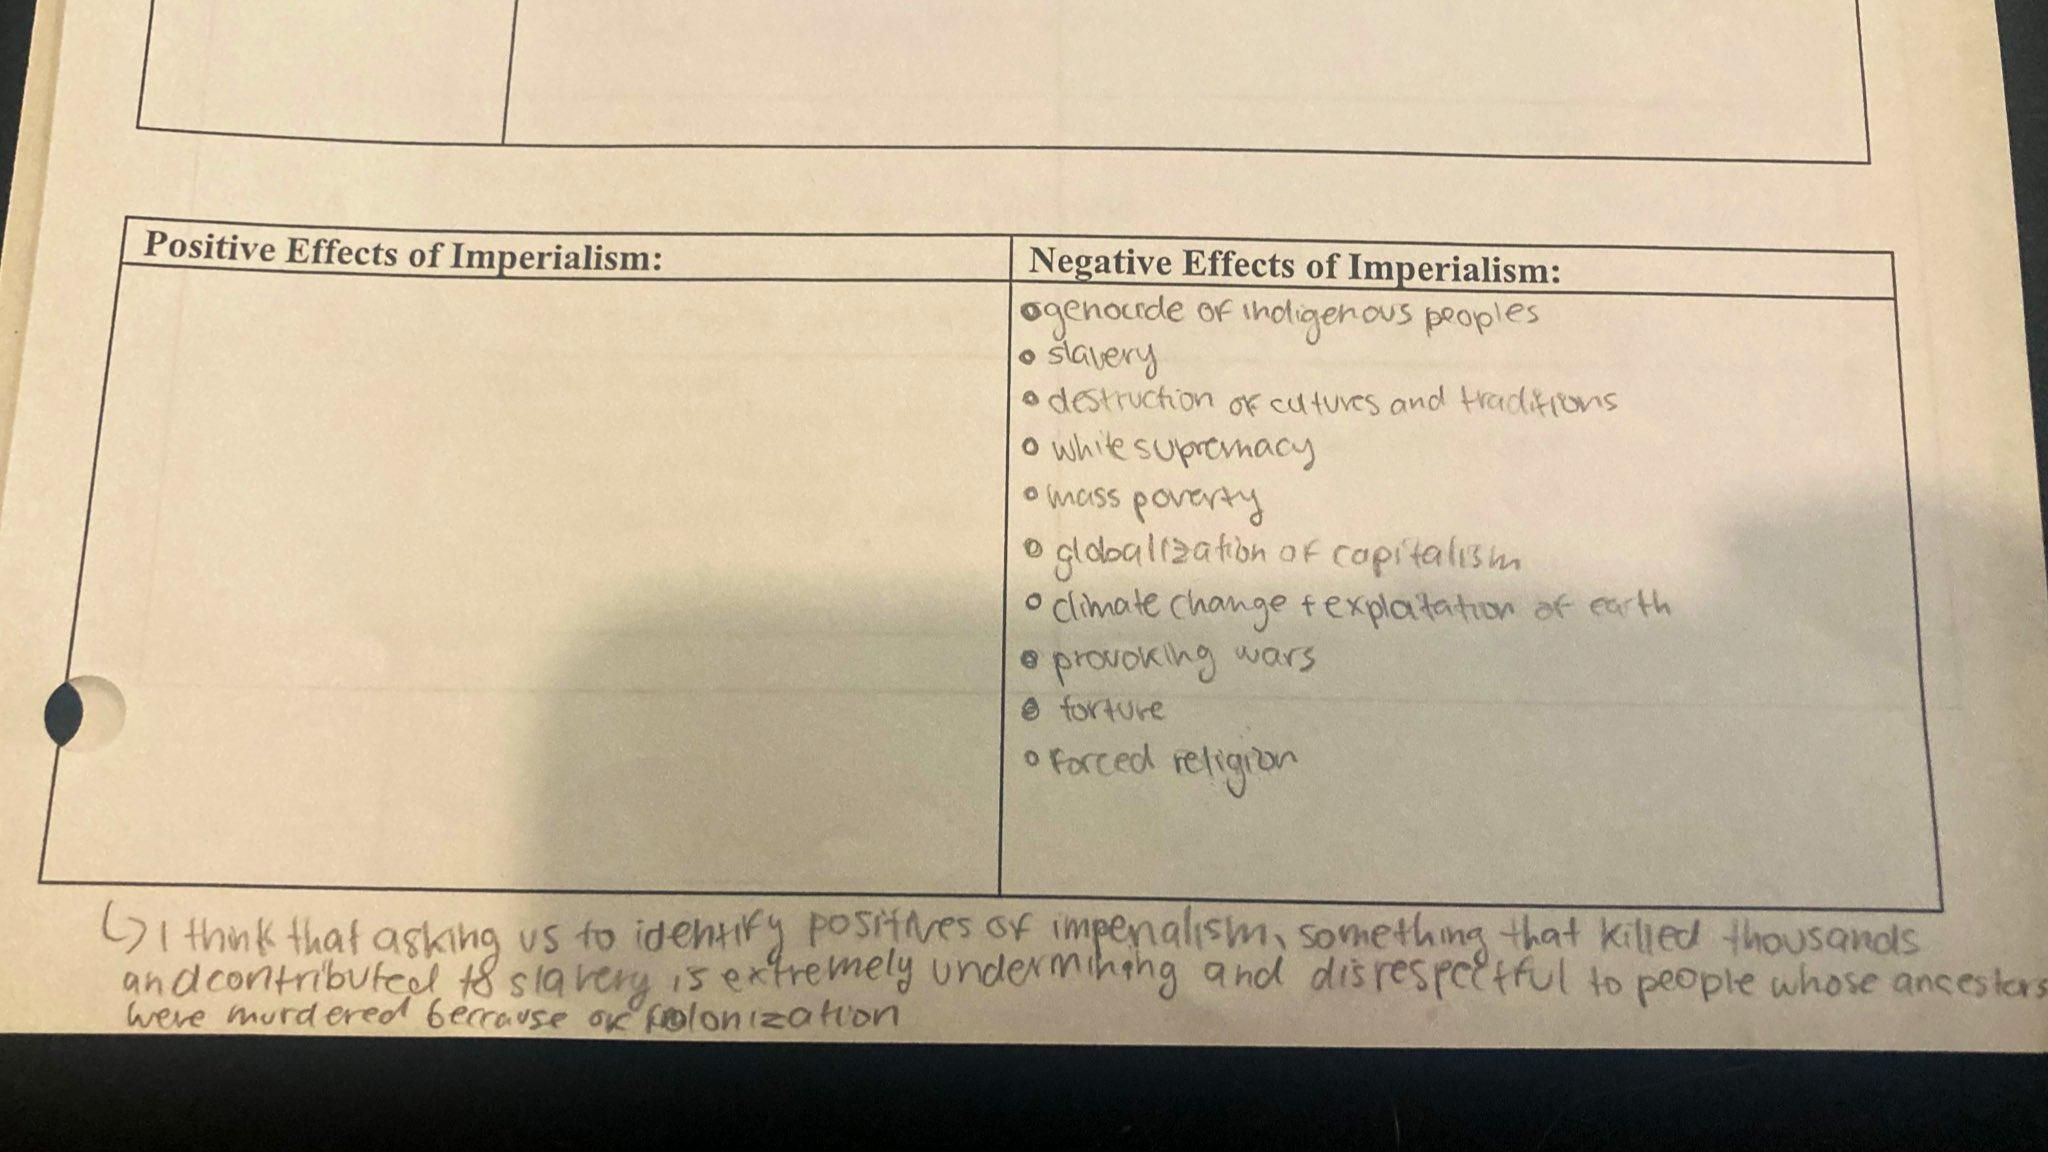 Student's assignment listing no positive effects of imperialism